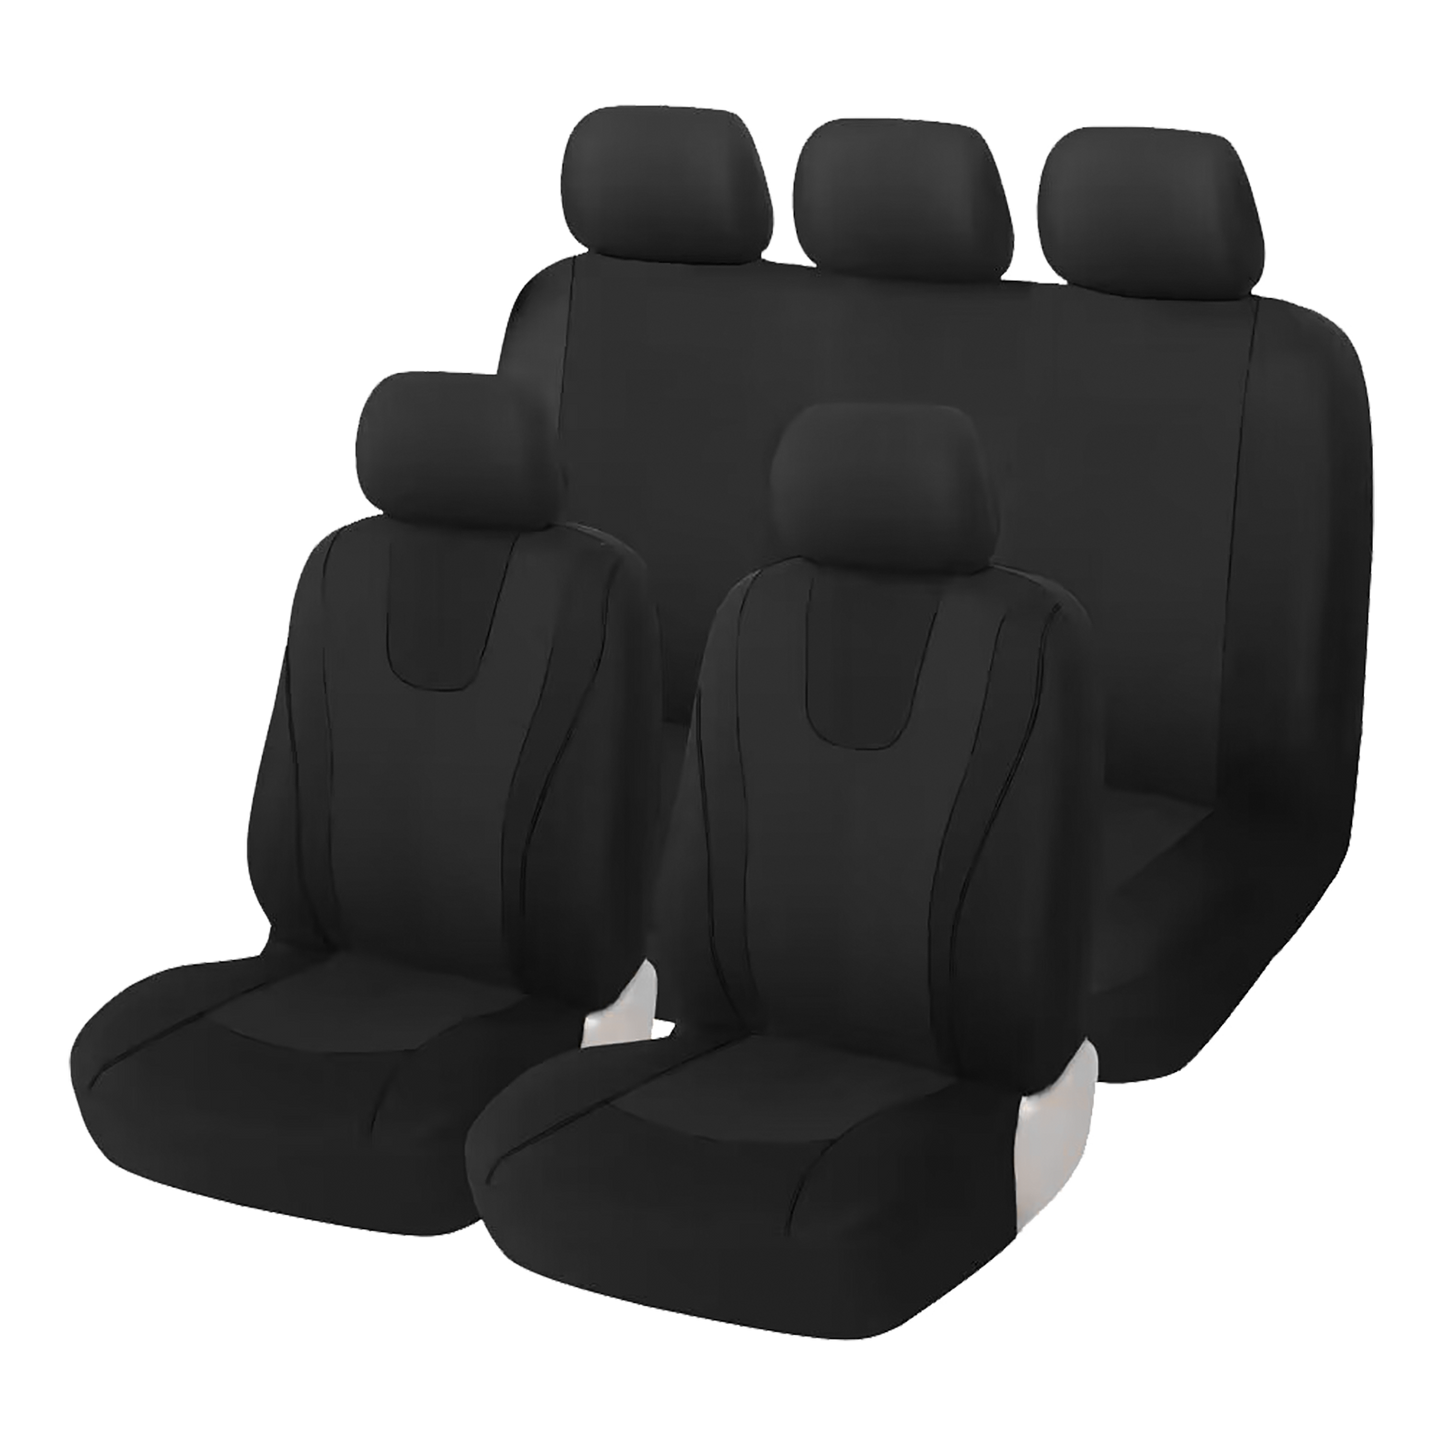 universal car seat cover fabric for 5 seat black